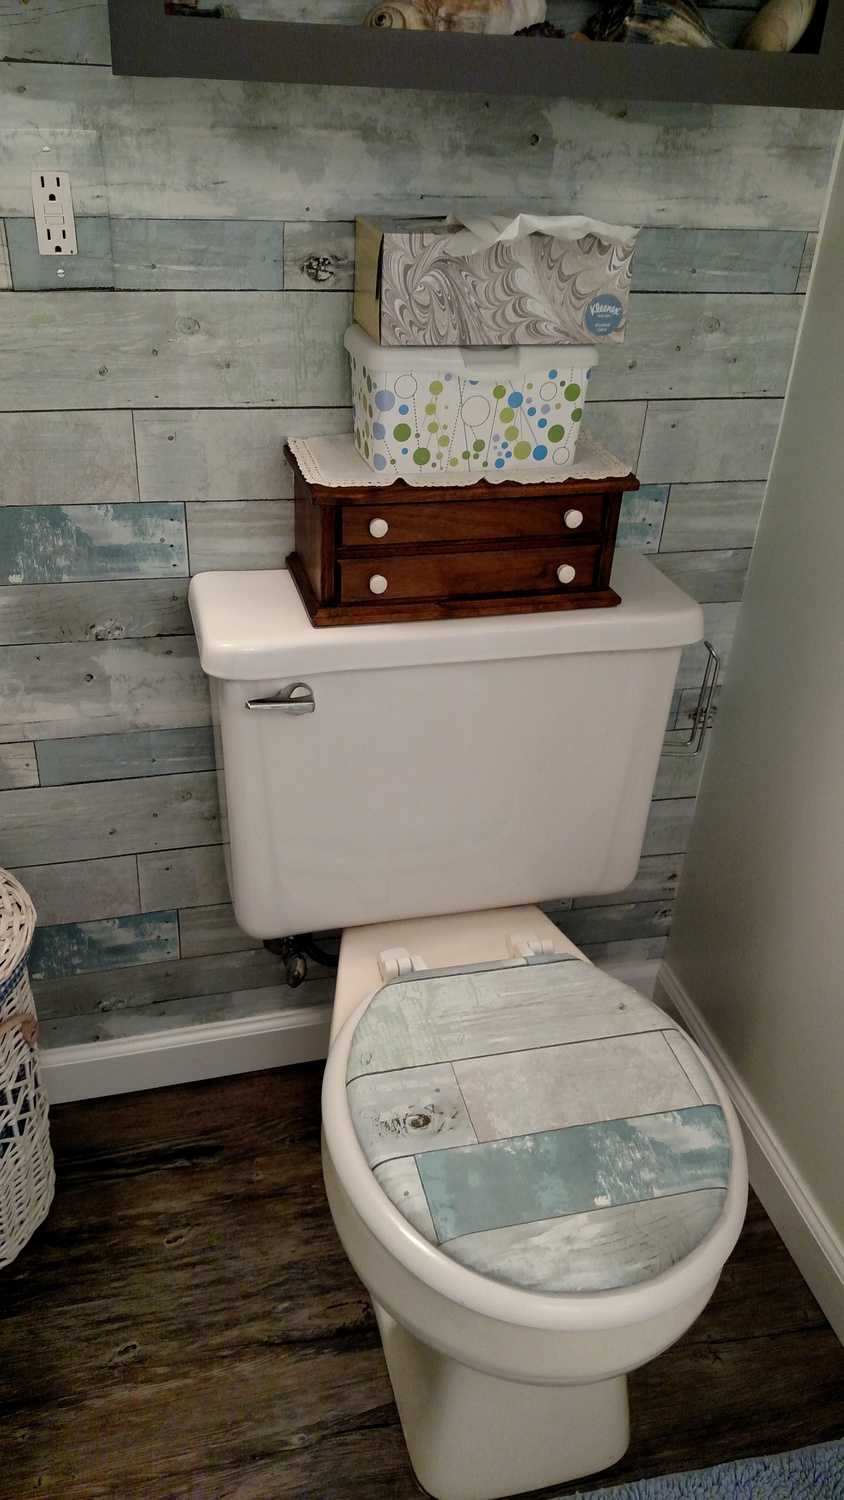 wallpapered toilet lid